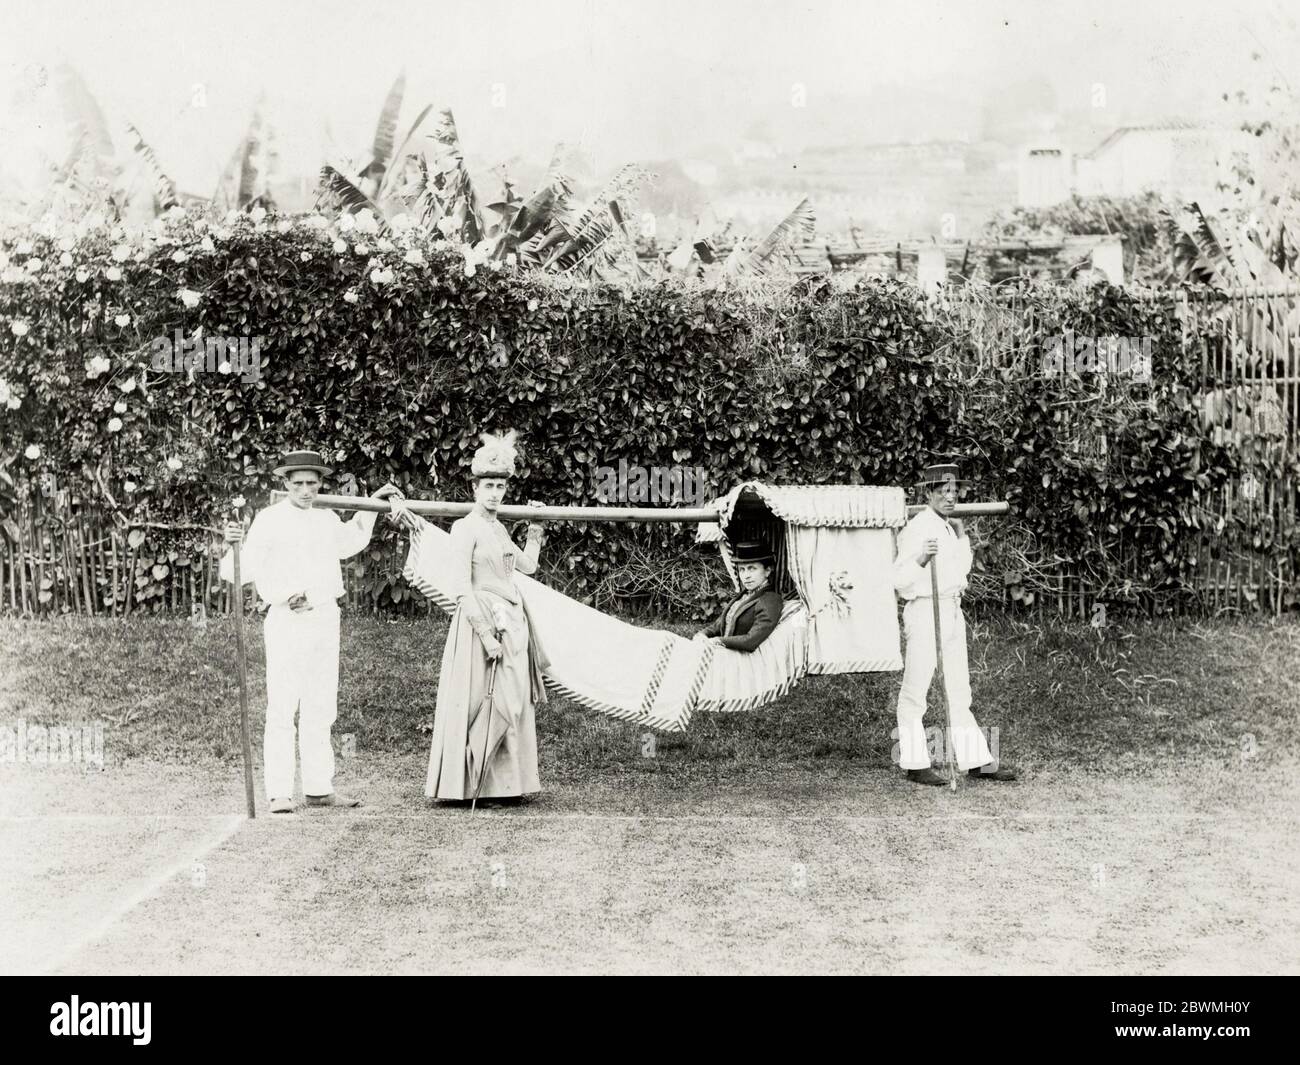 Vintage 19th century photograph - woman being carried in a hammock, carrying chair, probably Madeira or Canary Islands. Stock Photo